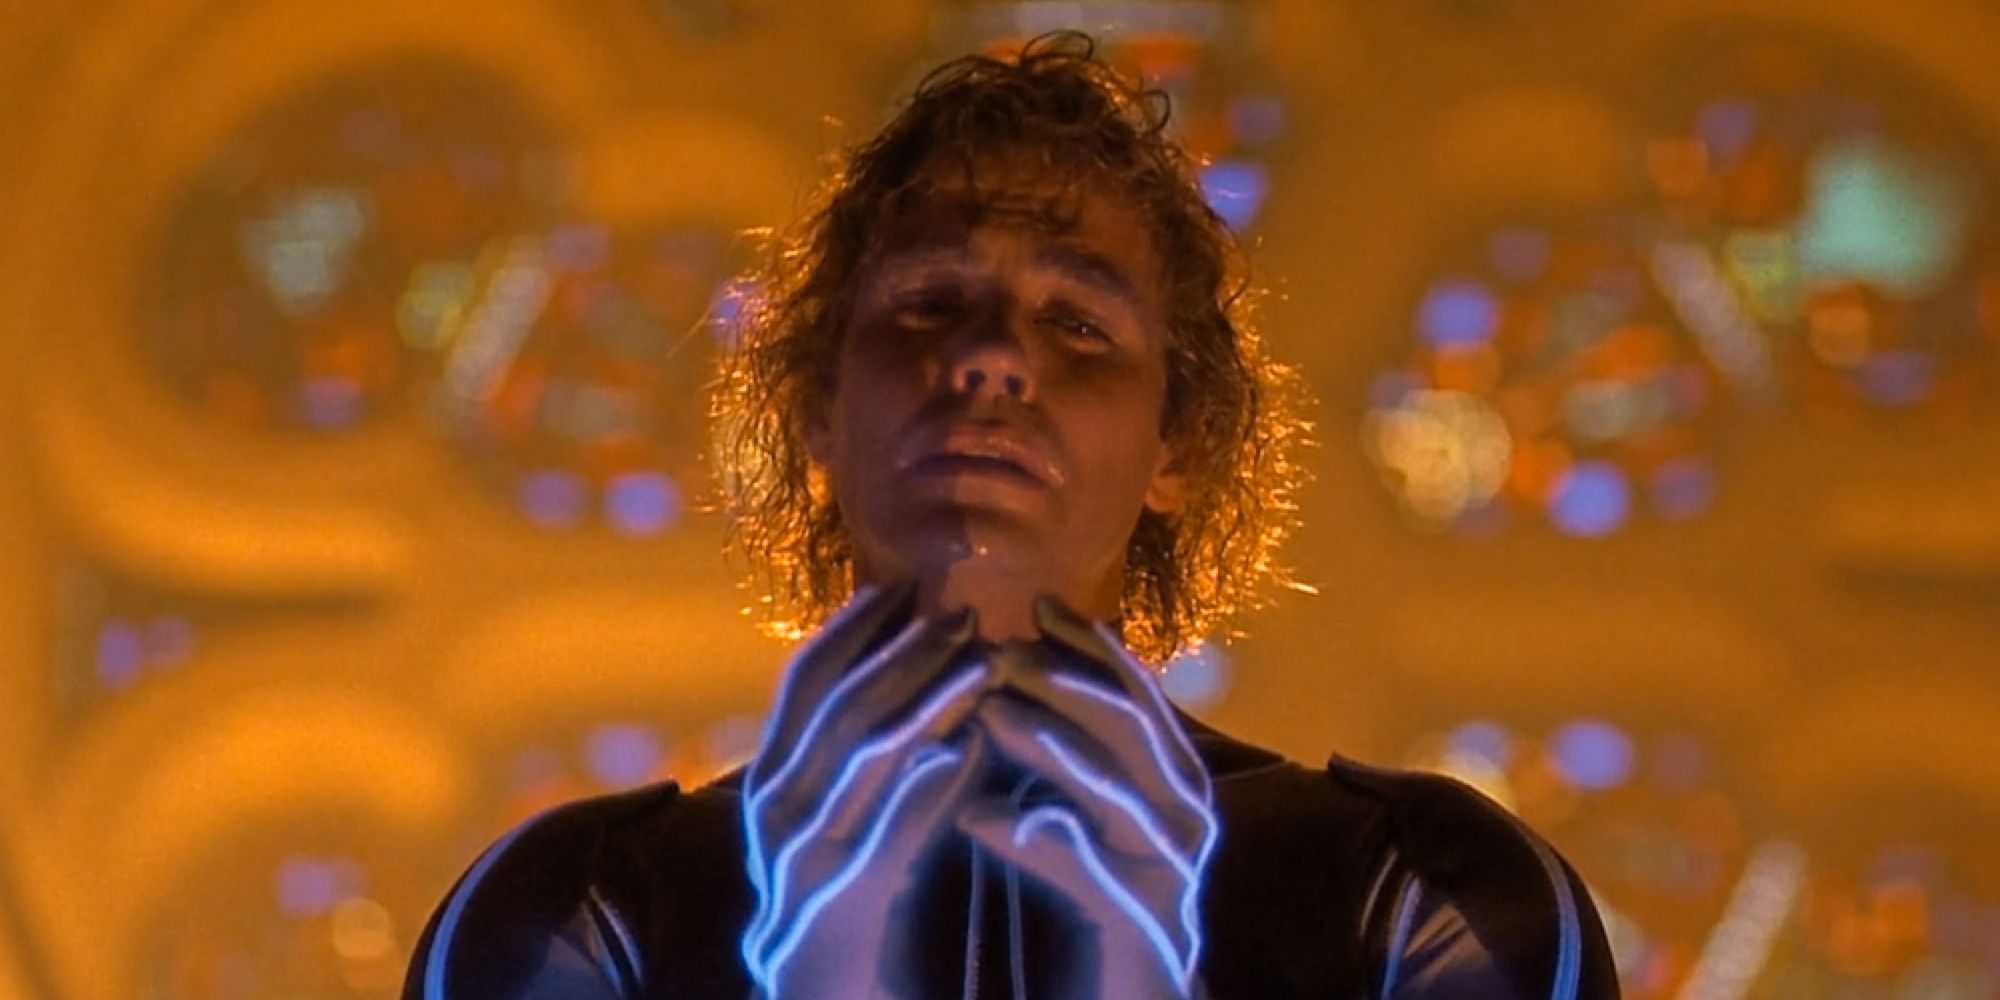 A man crying in The Lawnmower Man